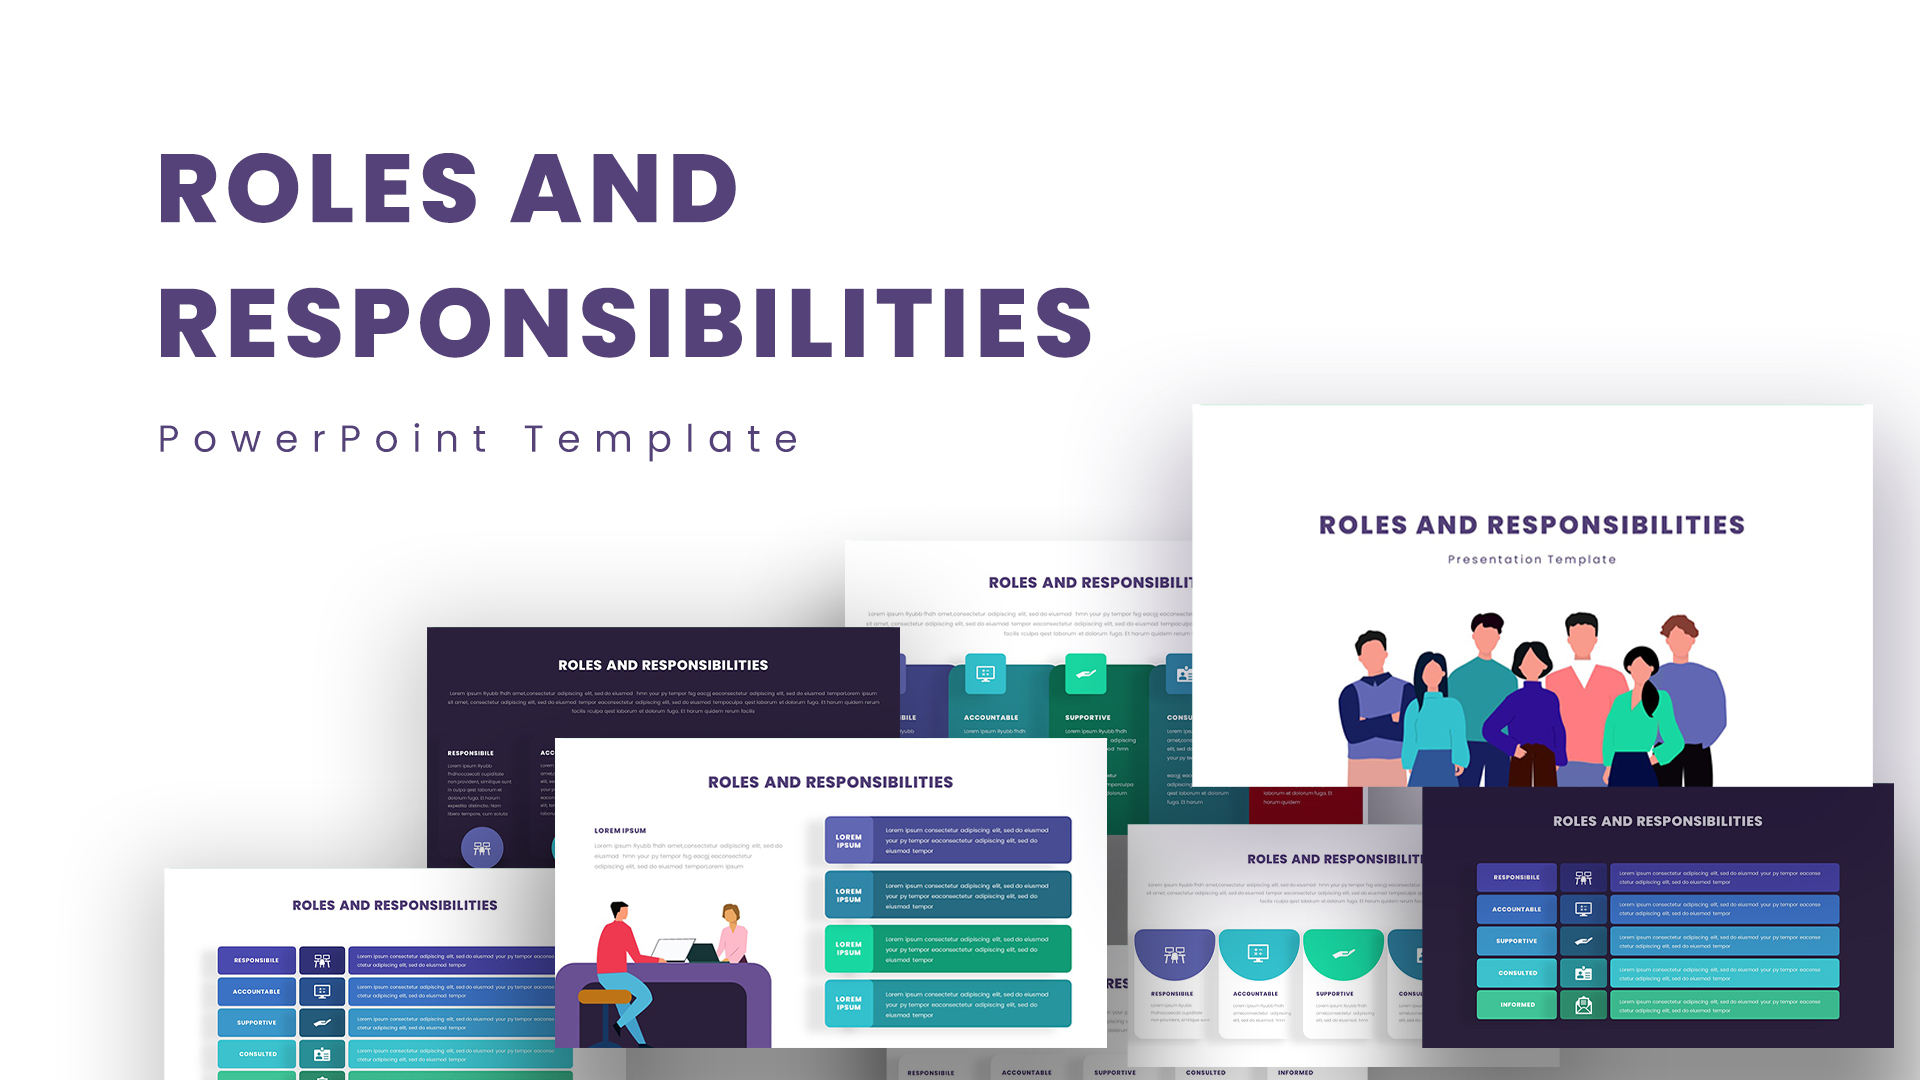  Roles and Responsibility PowerPoint Template